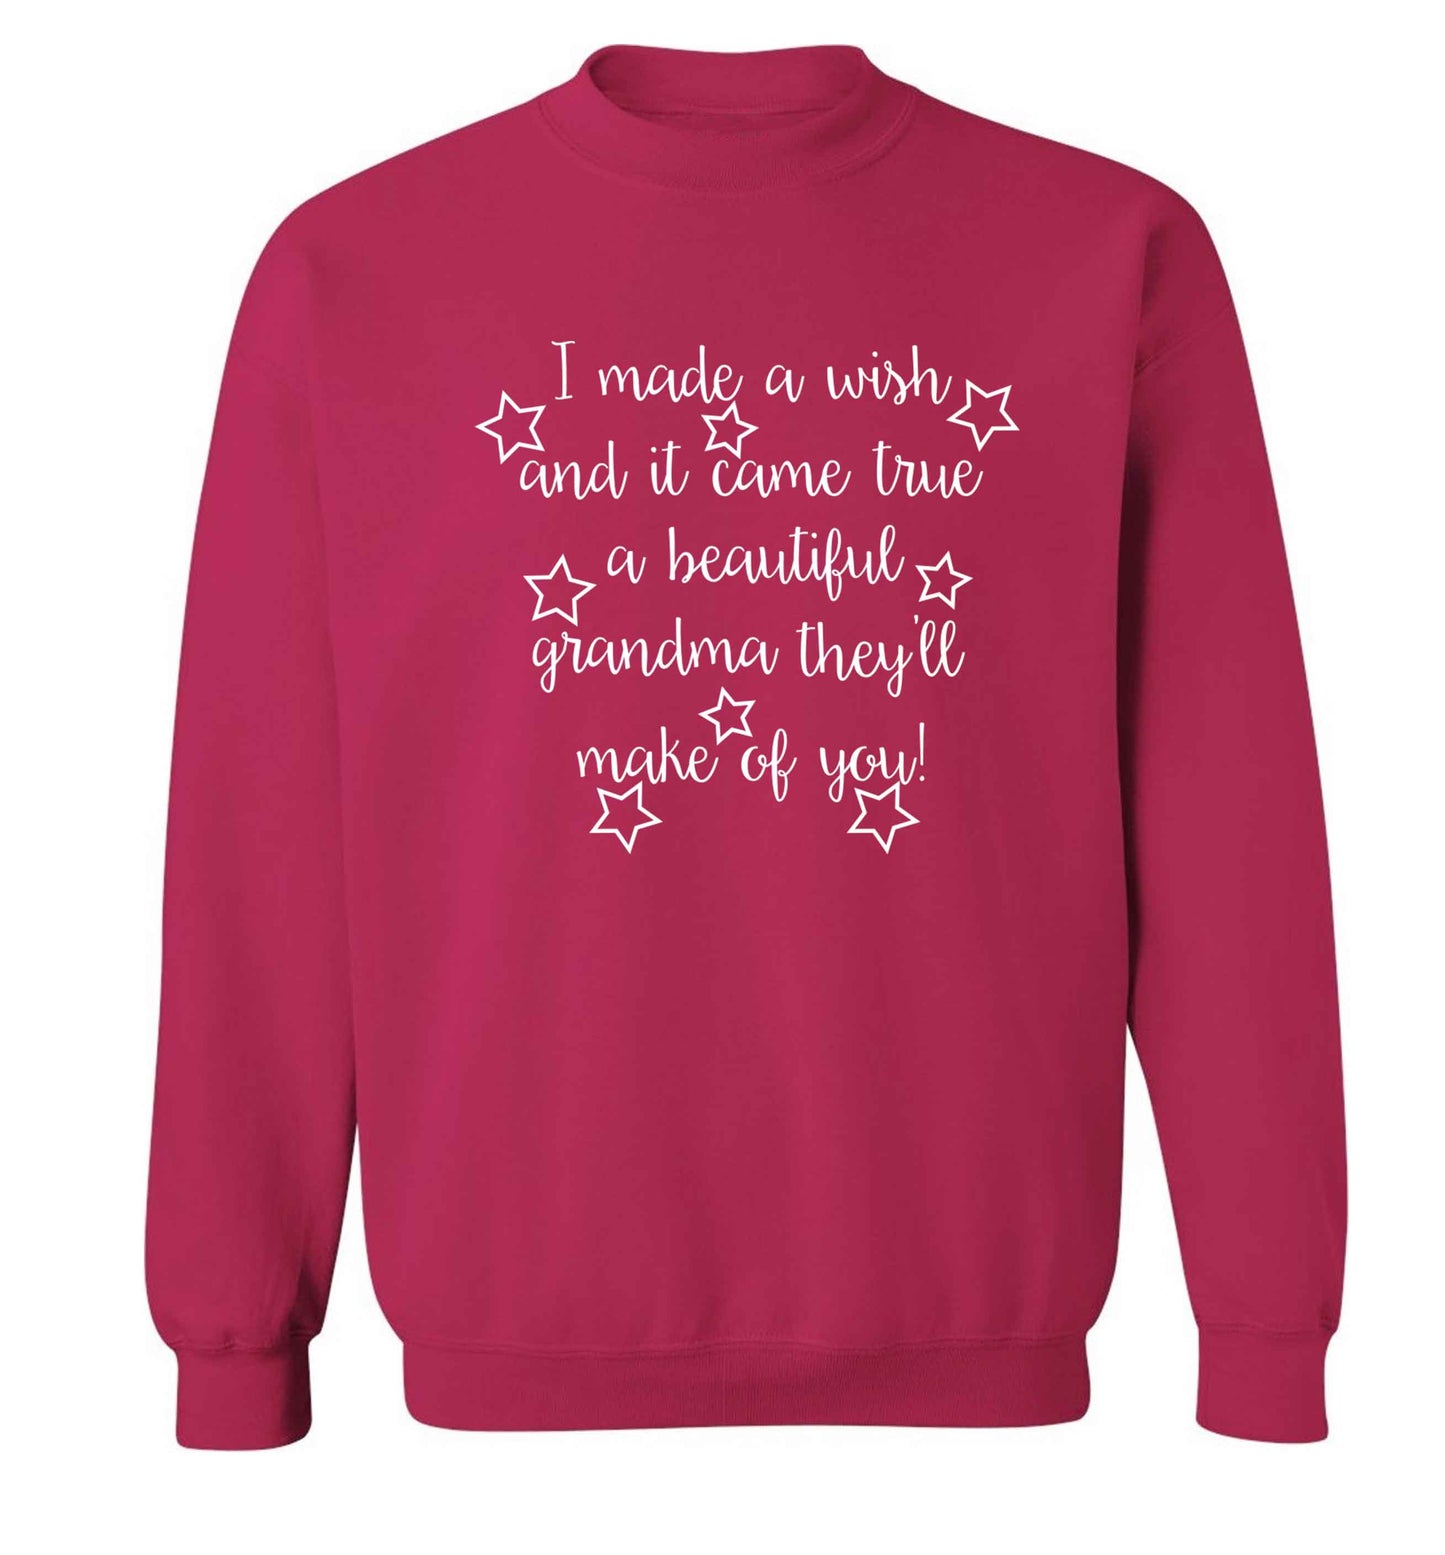 I made a wish and it came true a beautiful grandma they'll make of you! Adult's unisex pink Sweater 2XL